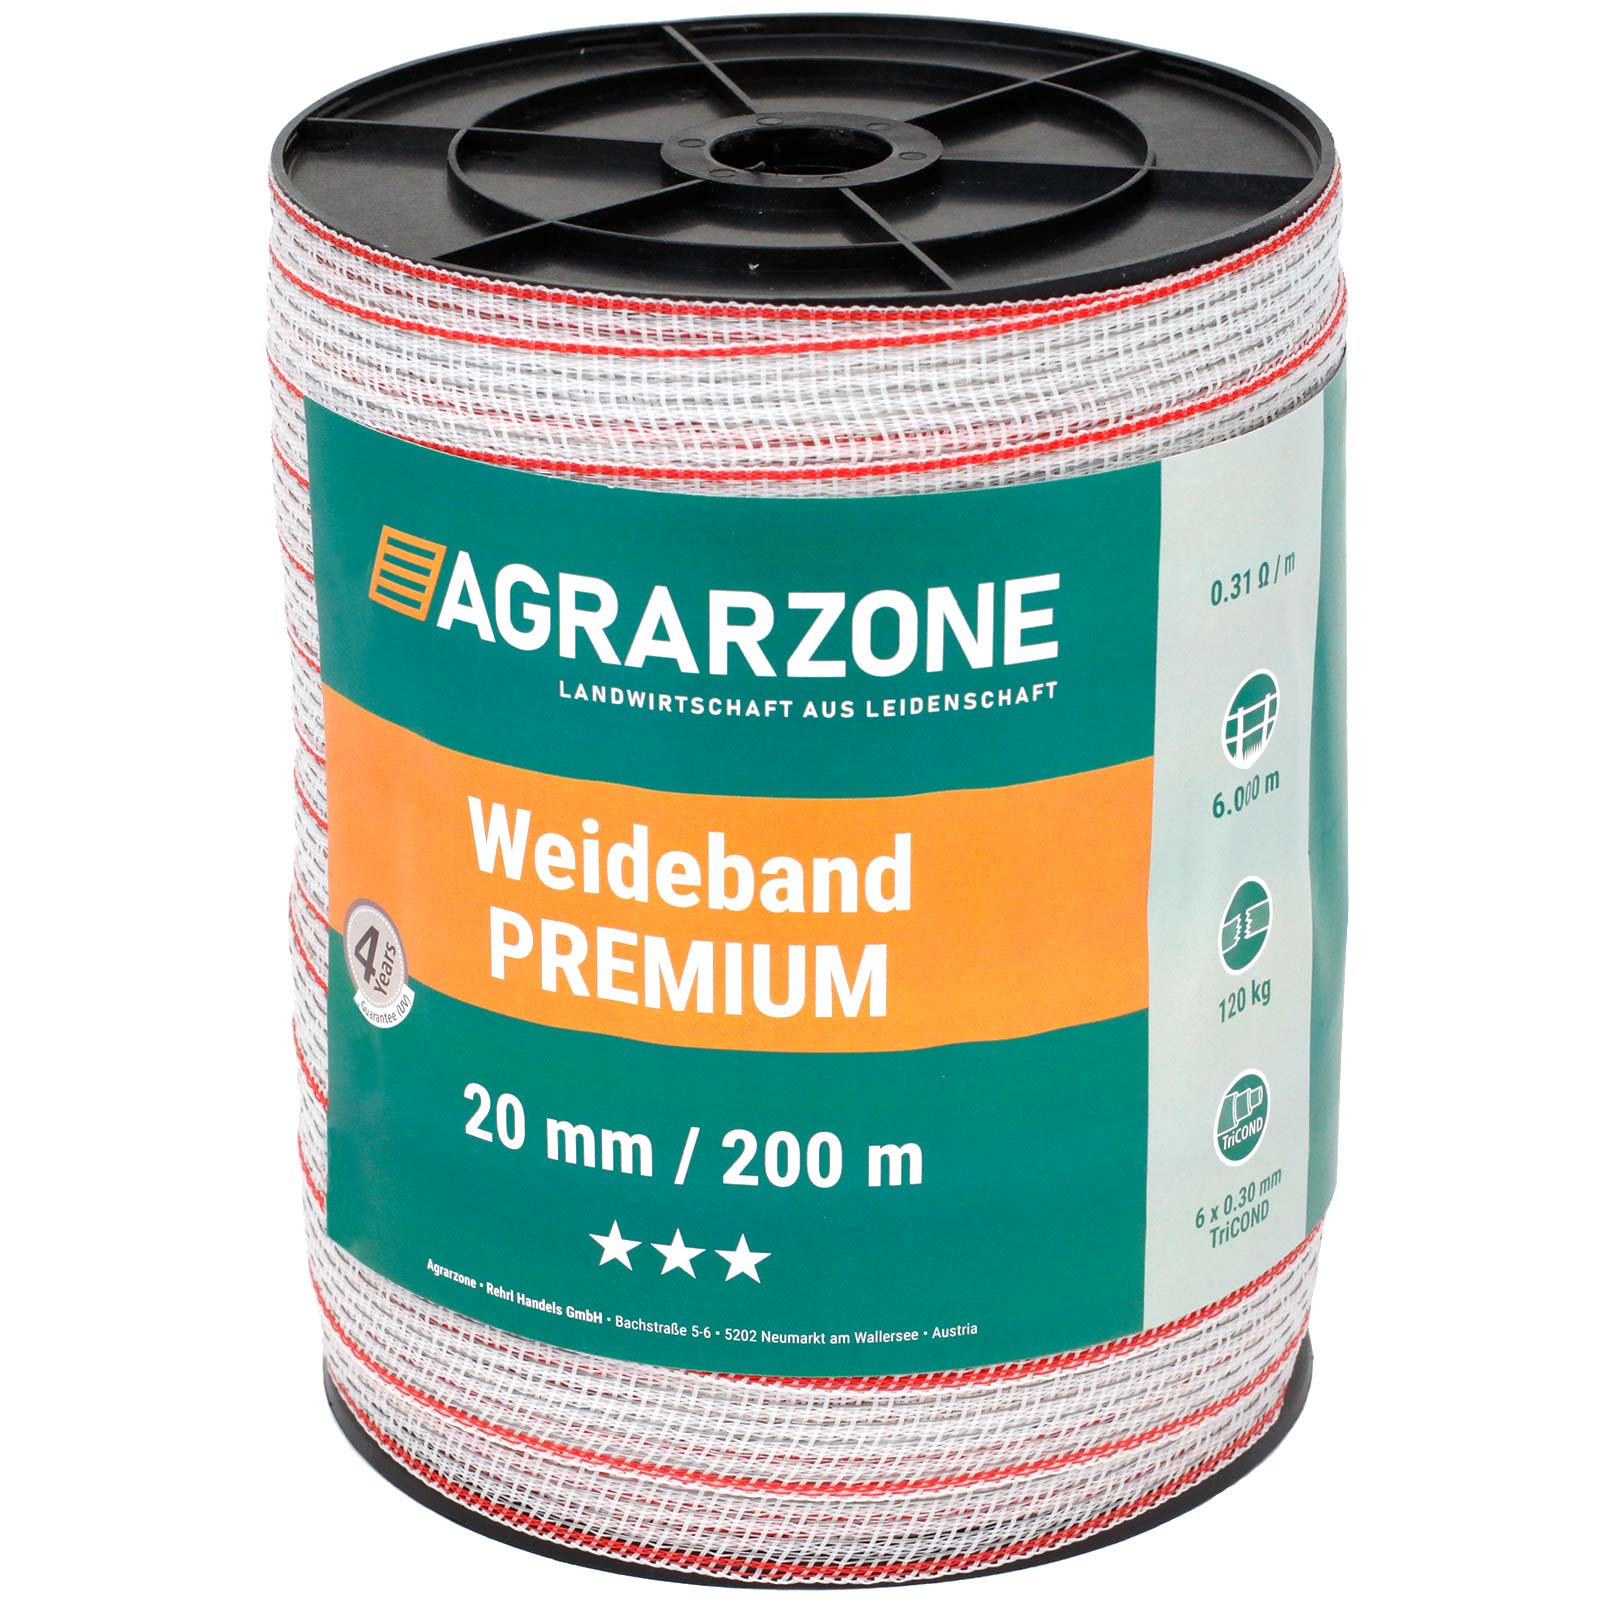 Agrarzone Pasture Fence Tape Premium 0.30 TriCOND, white-red 200 m x 20 mm